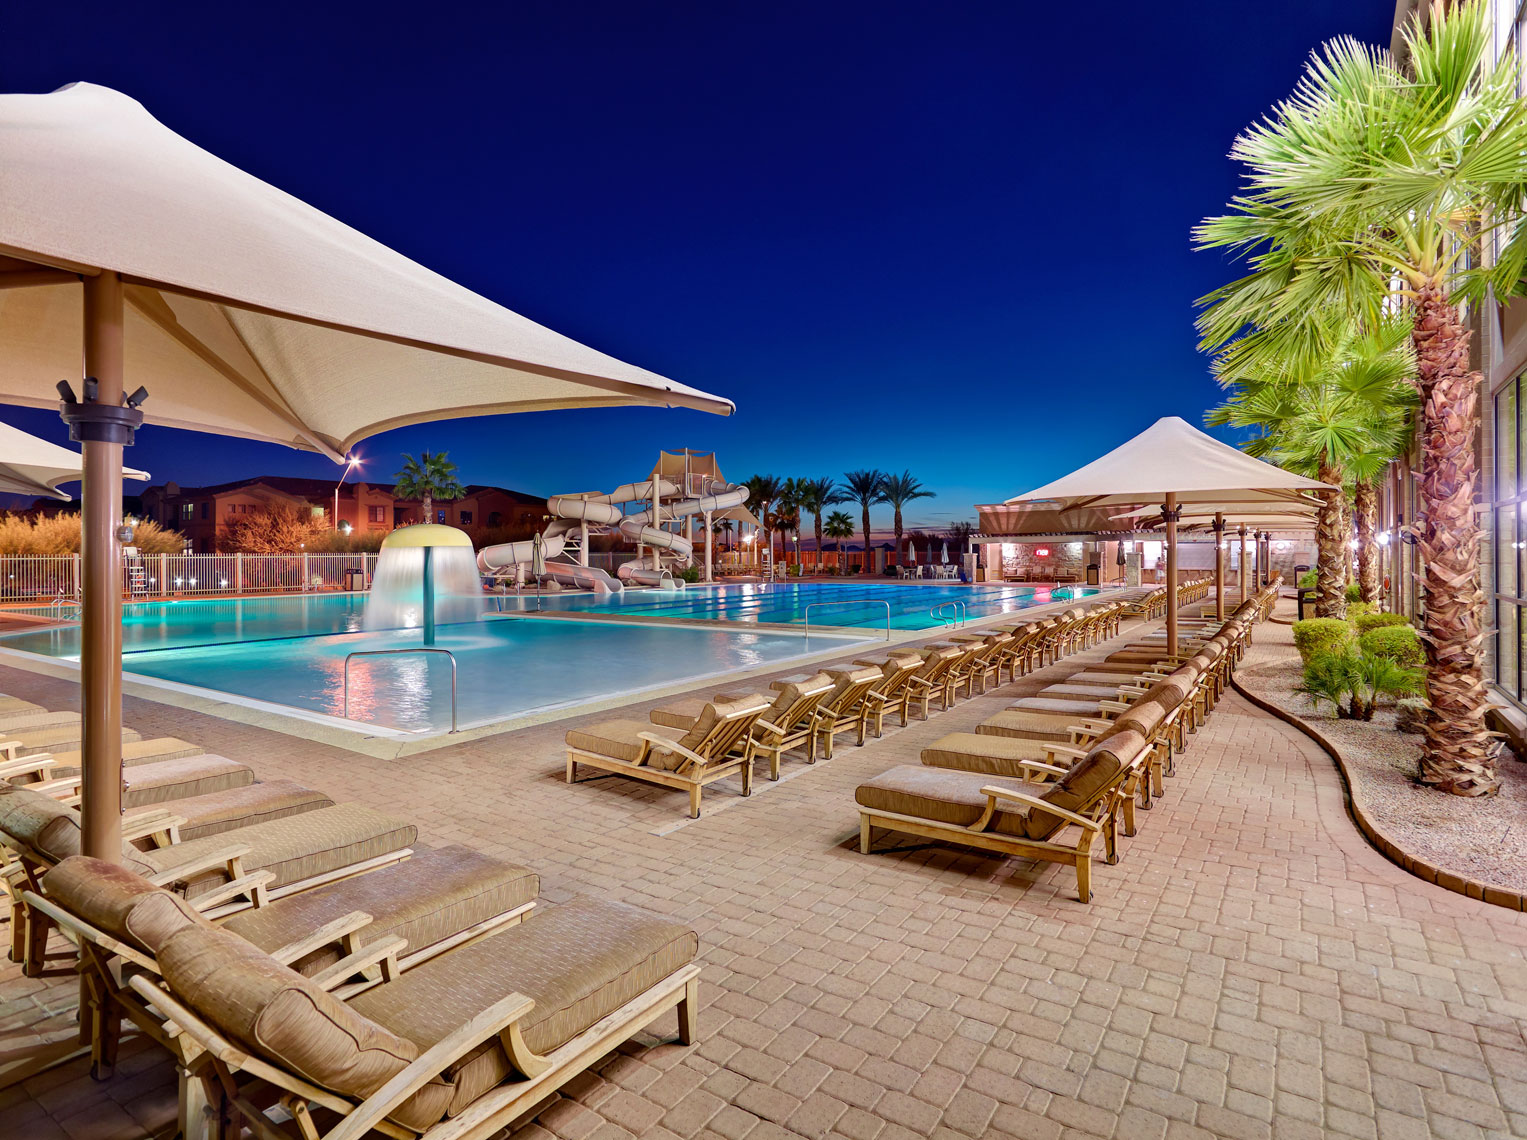 Life Time Fitness/pool and patio/architectural photo